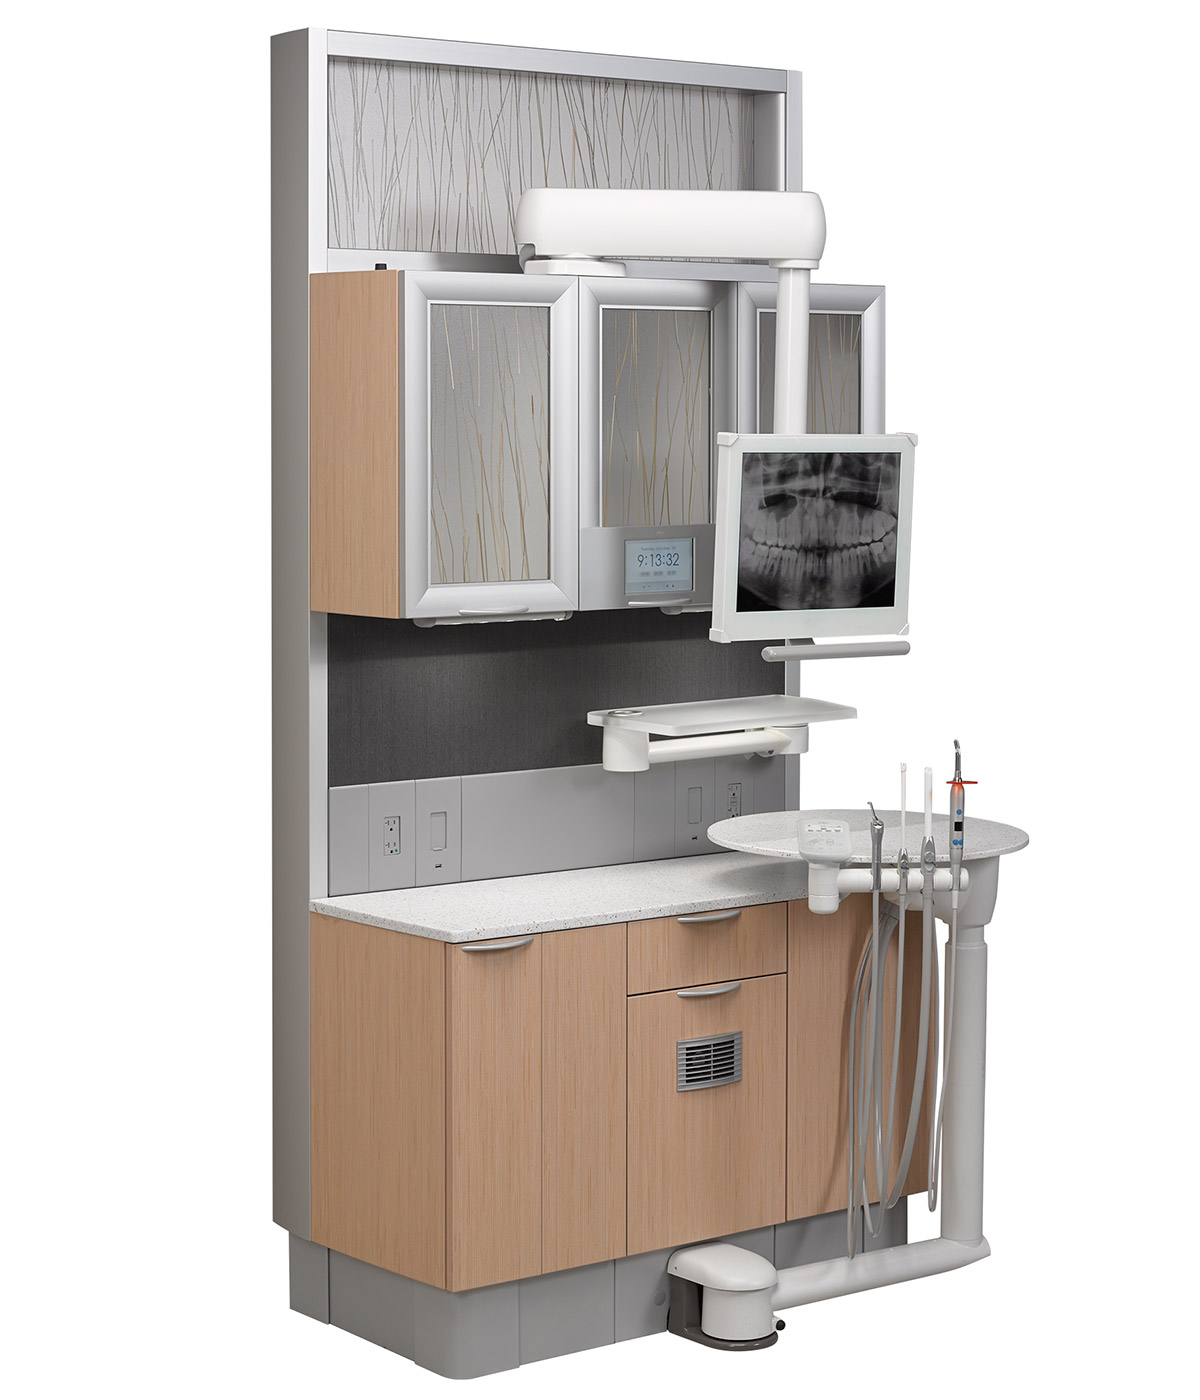 A-dec Inspire 591 treatment console with 12 o'clock delivery system